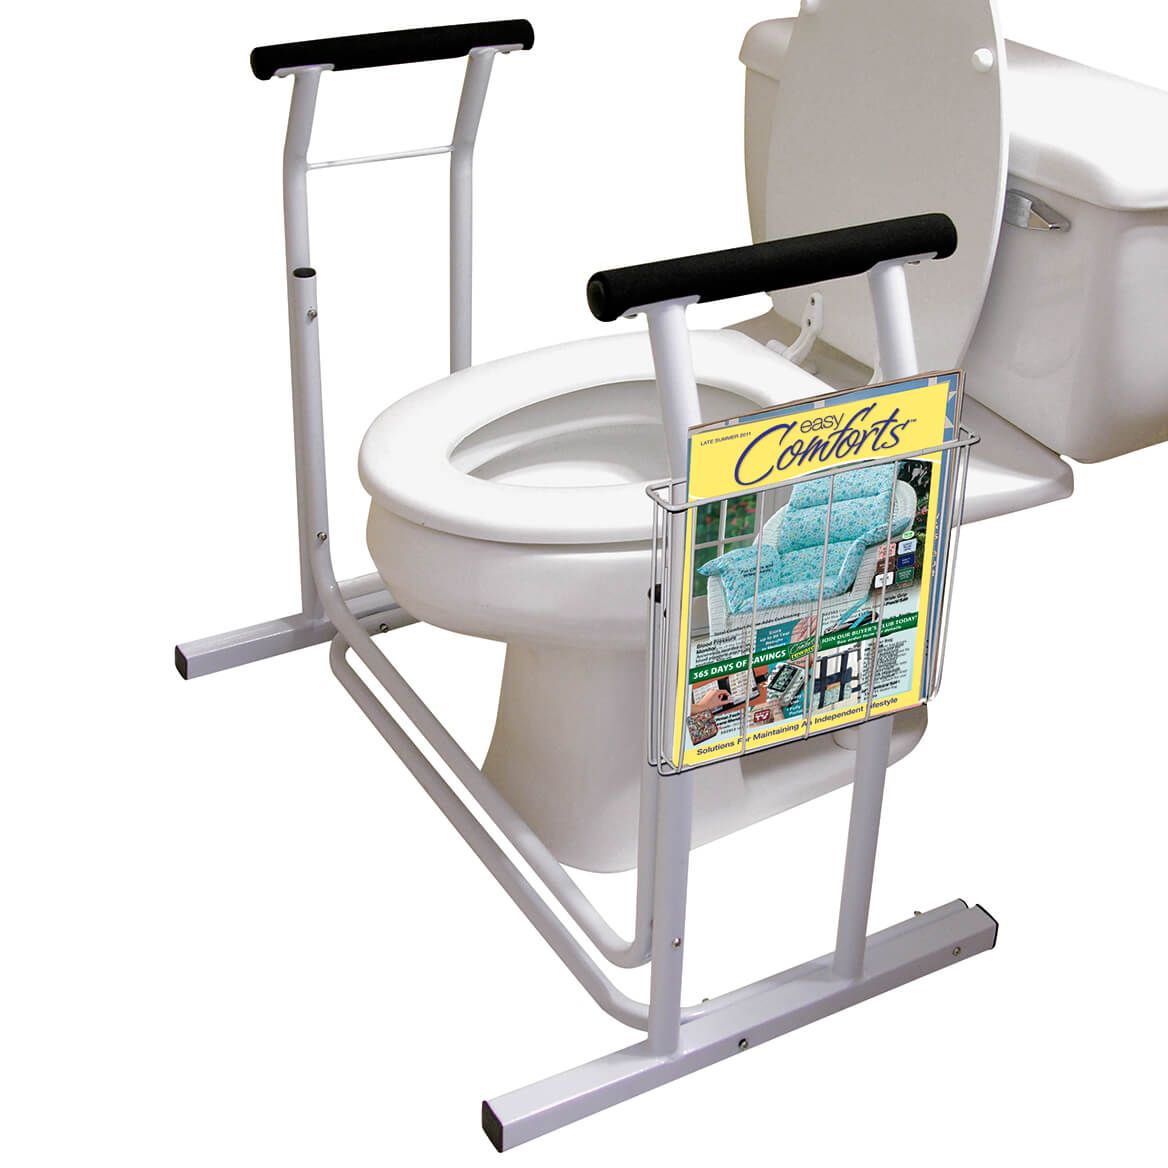 Deluxe Toilet Safety Support                    XL + '-' + 304953